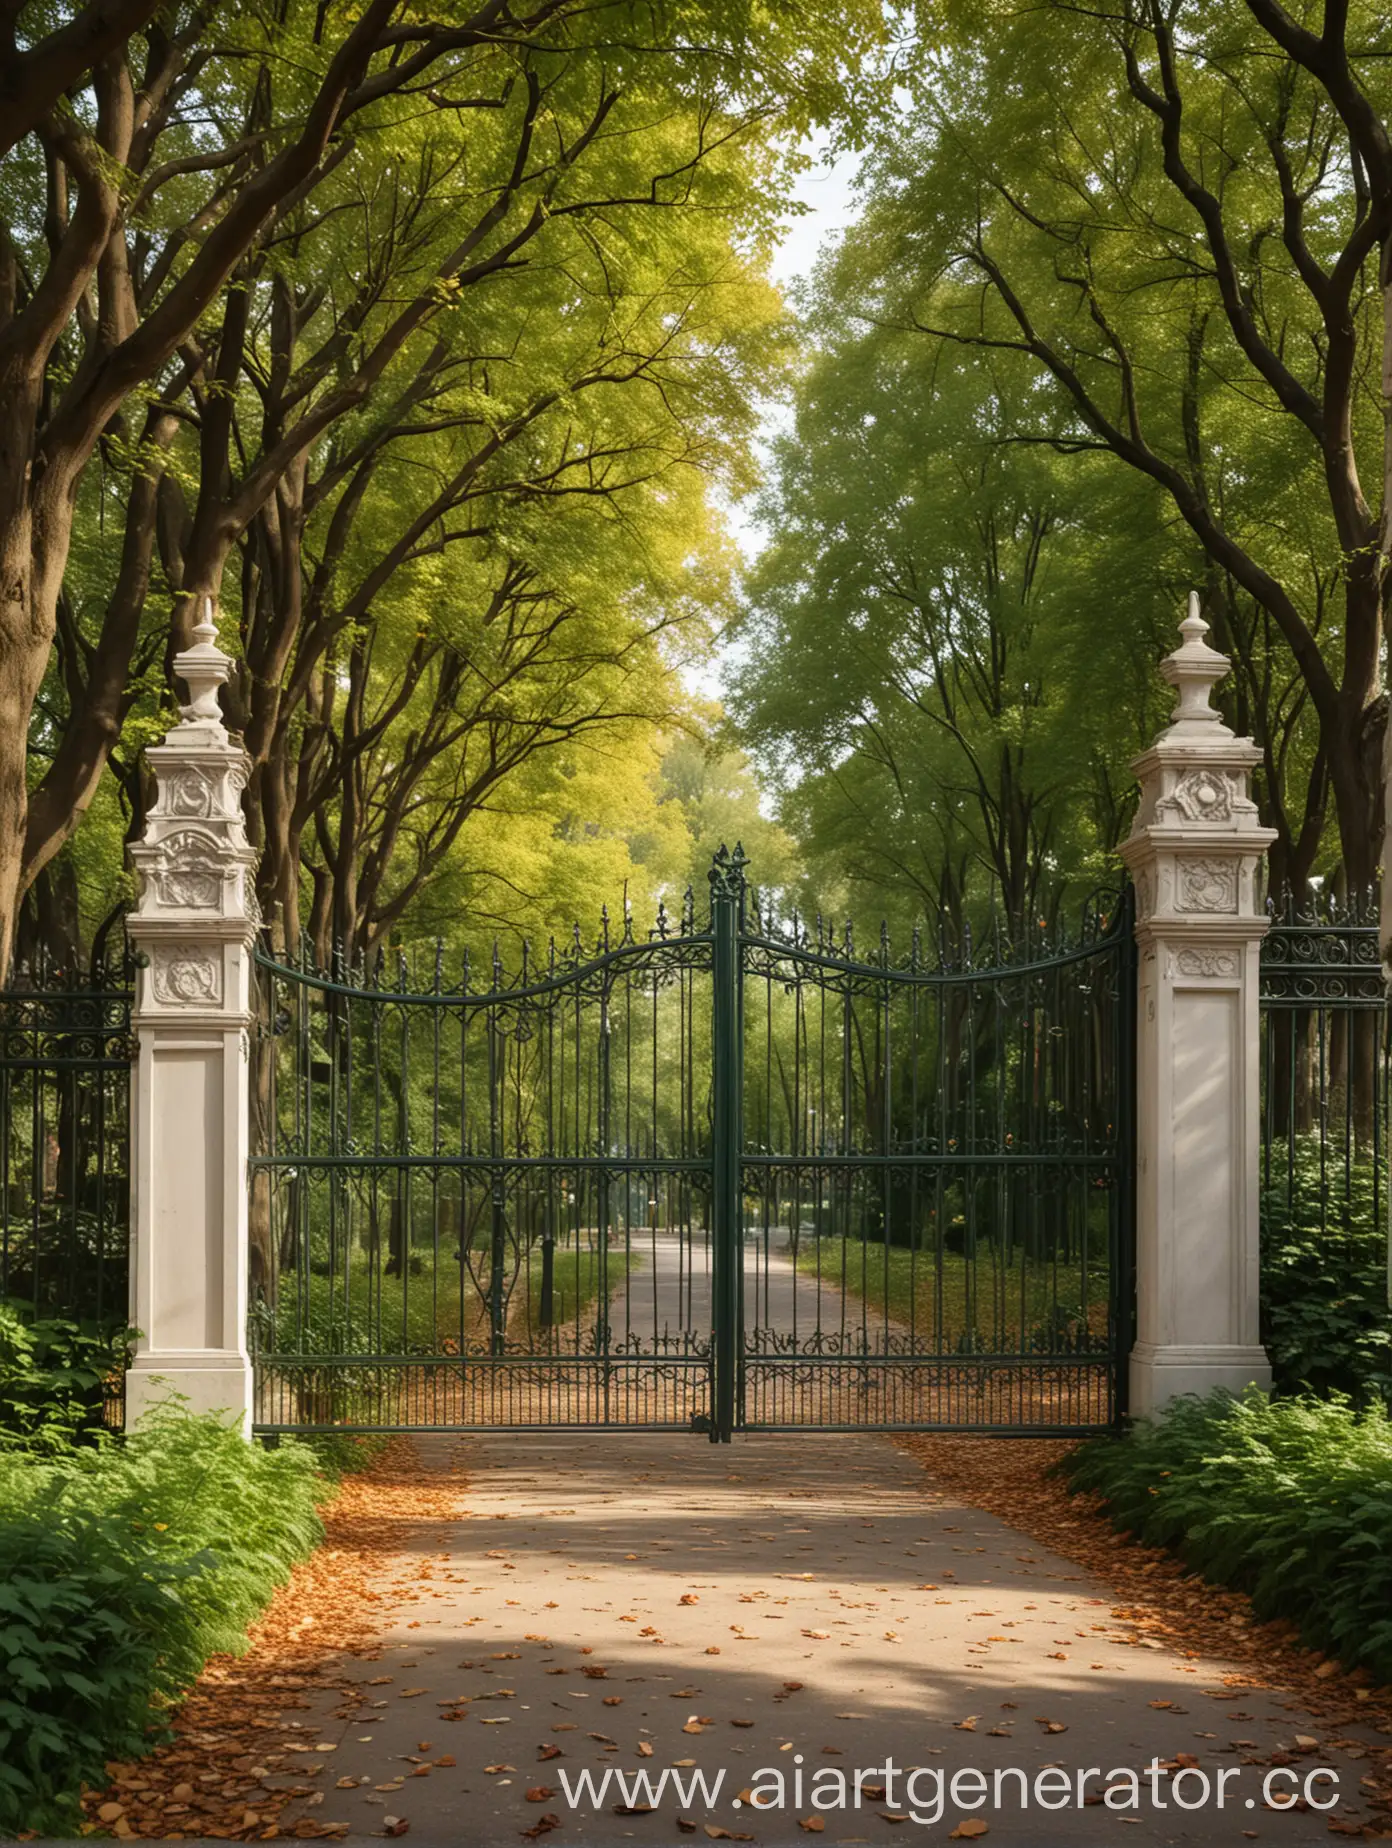 City-Park-Entrance-with-High-Fence-and-FaeInspired-Forest-Theme